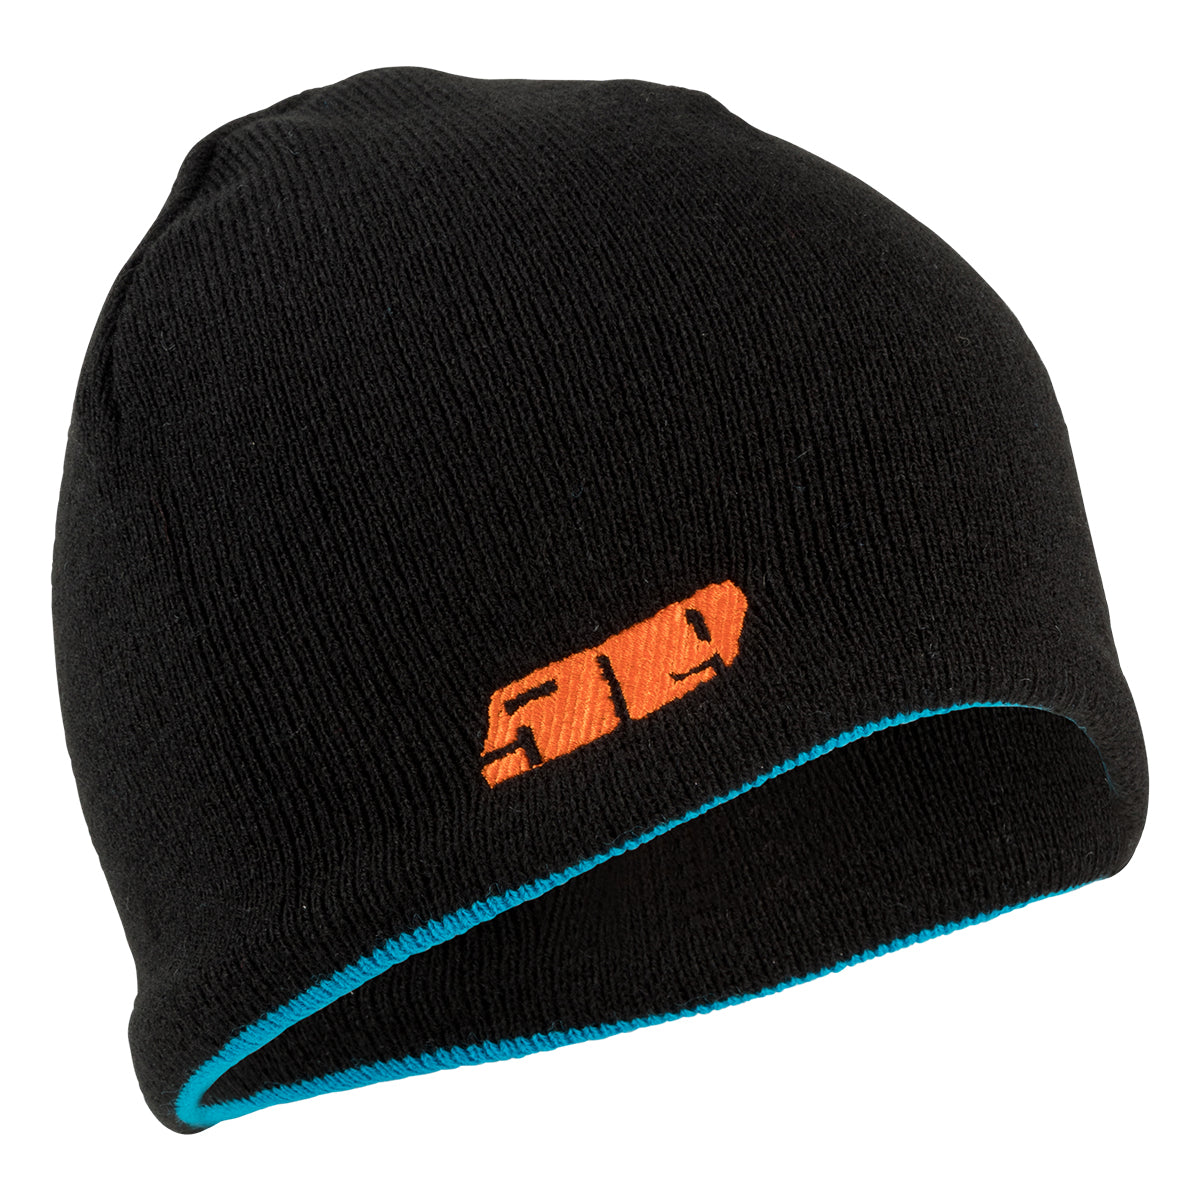 Reversible Beanie - F09002300 - The Parts Lodge